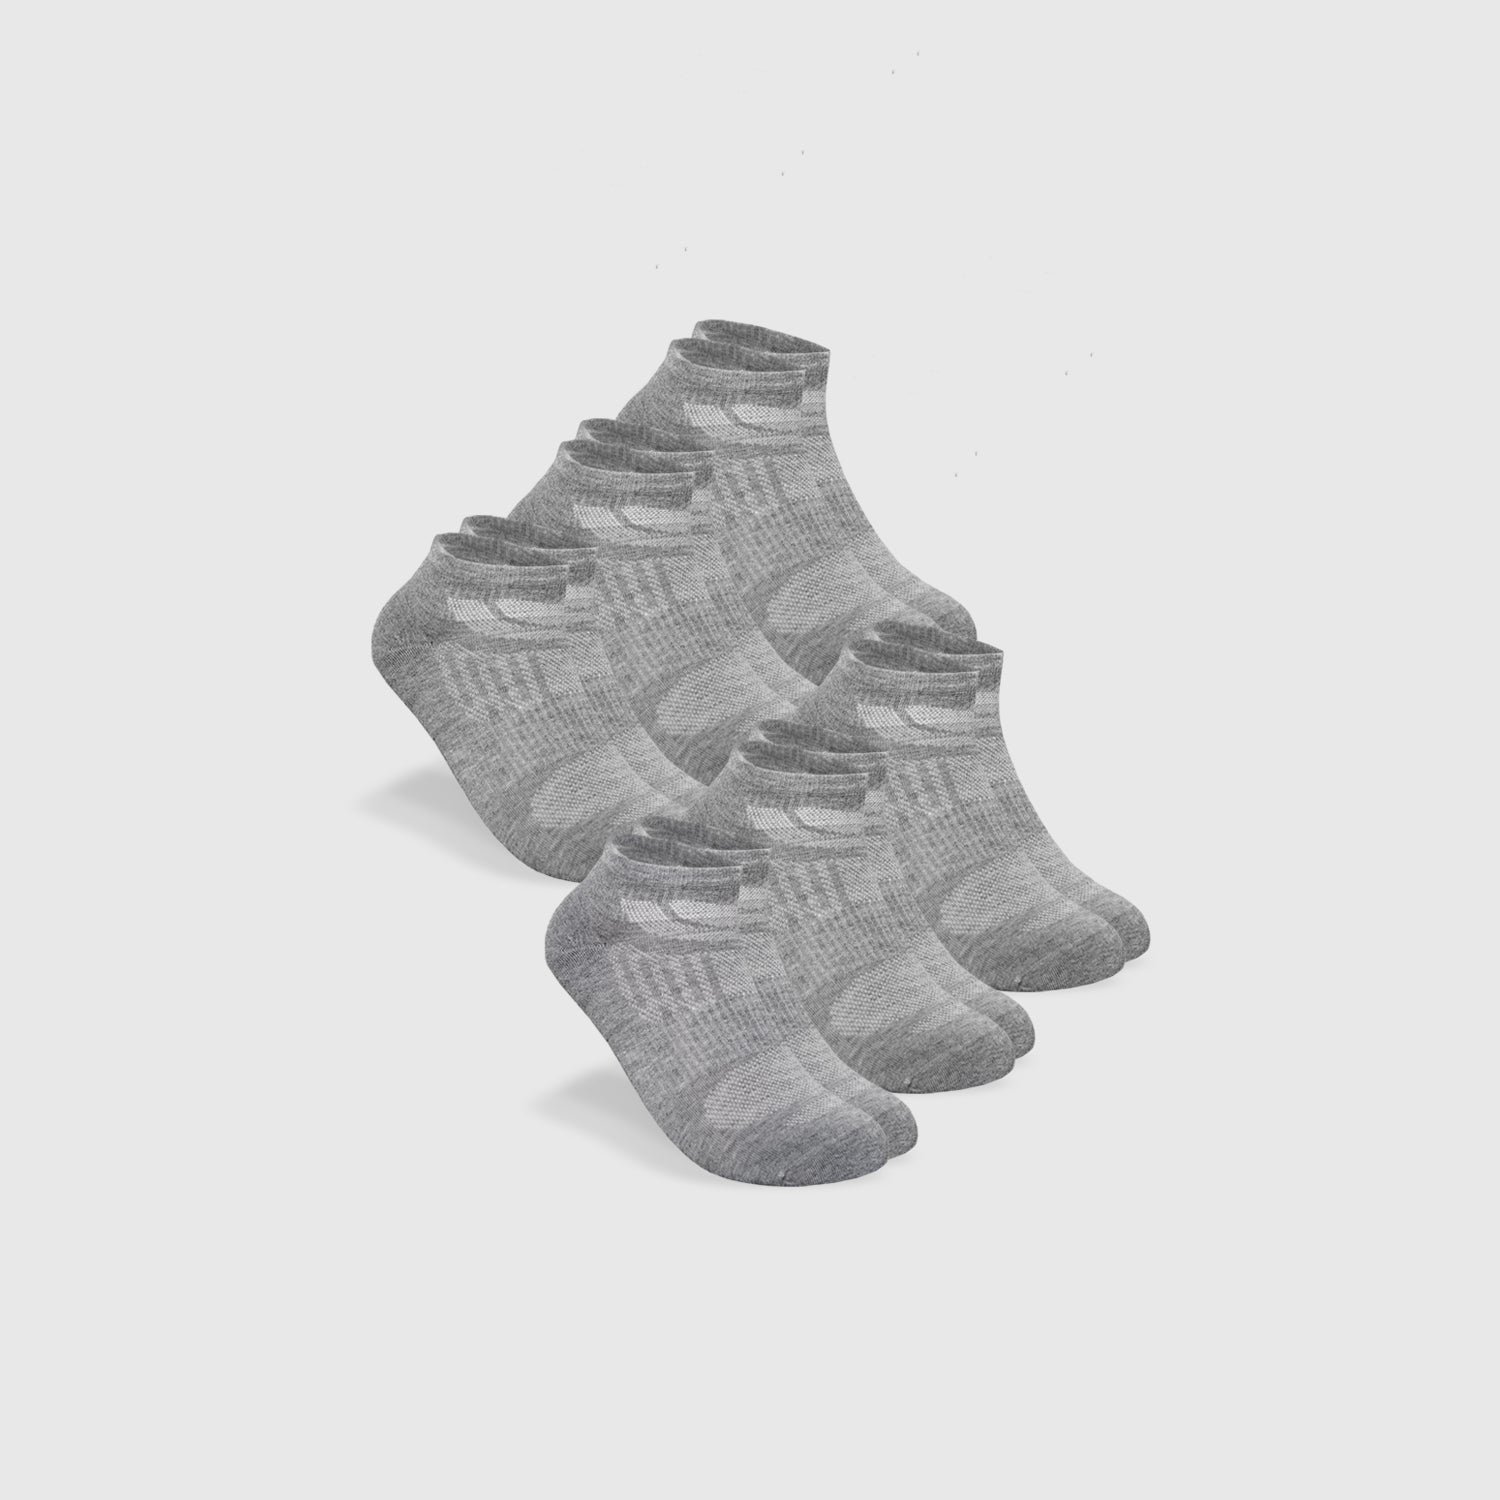 Heather Gray Ankle Socks 6-Pack